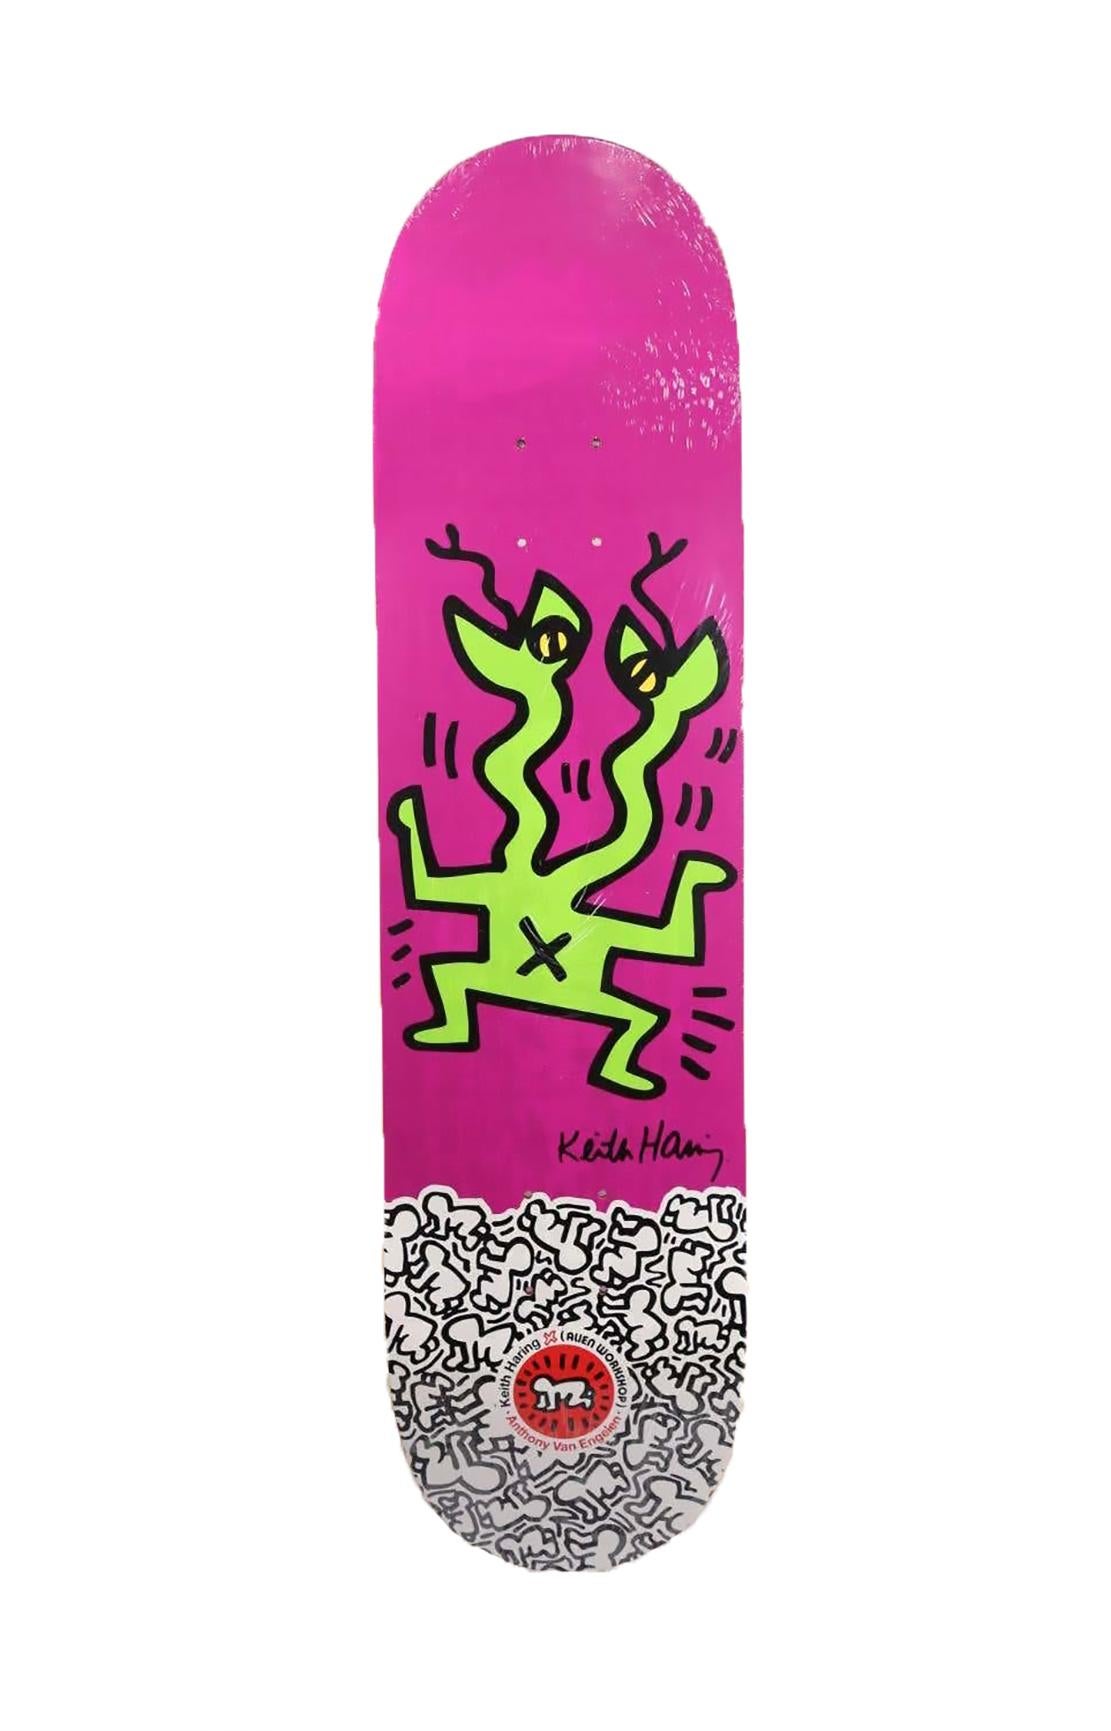 Keith Haring Skateboard Deck (Keith Haring lizard) - Sculpture by (after) Keith Haring